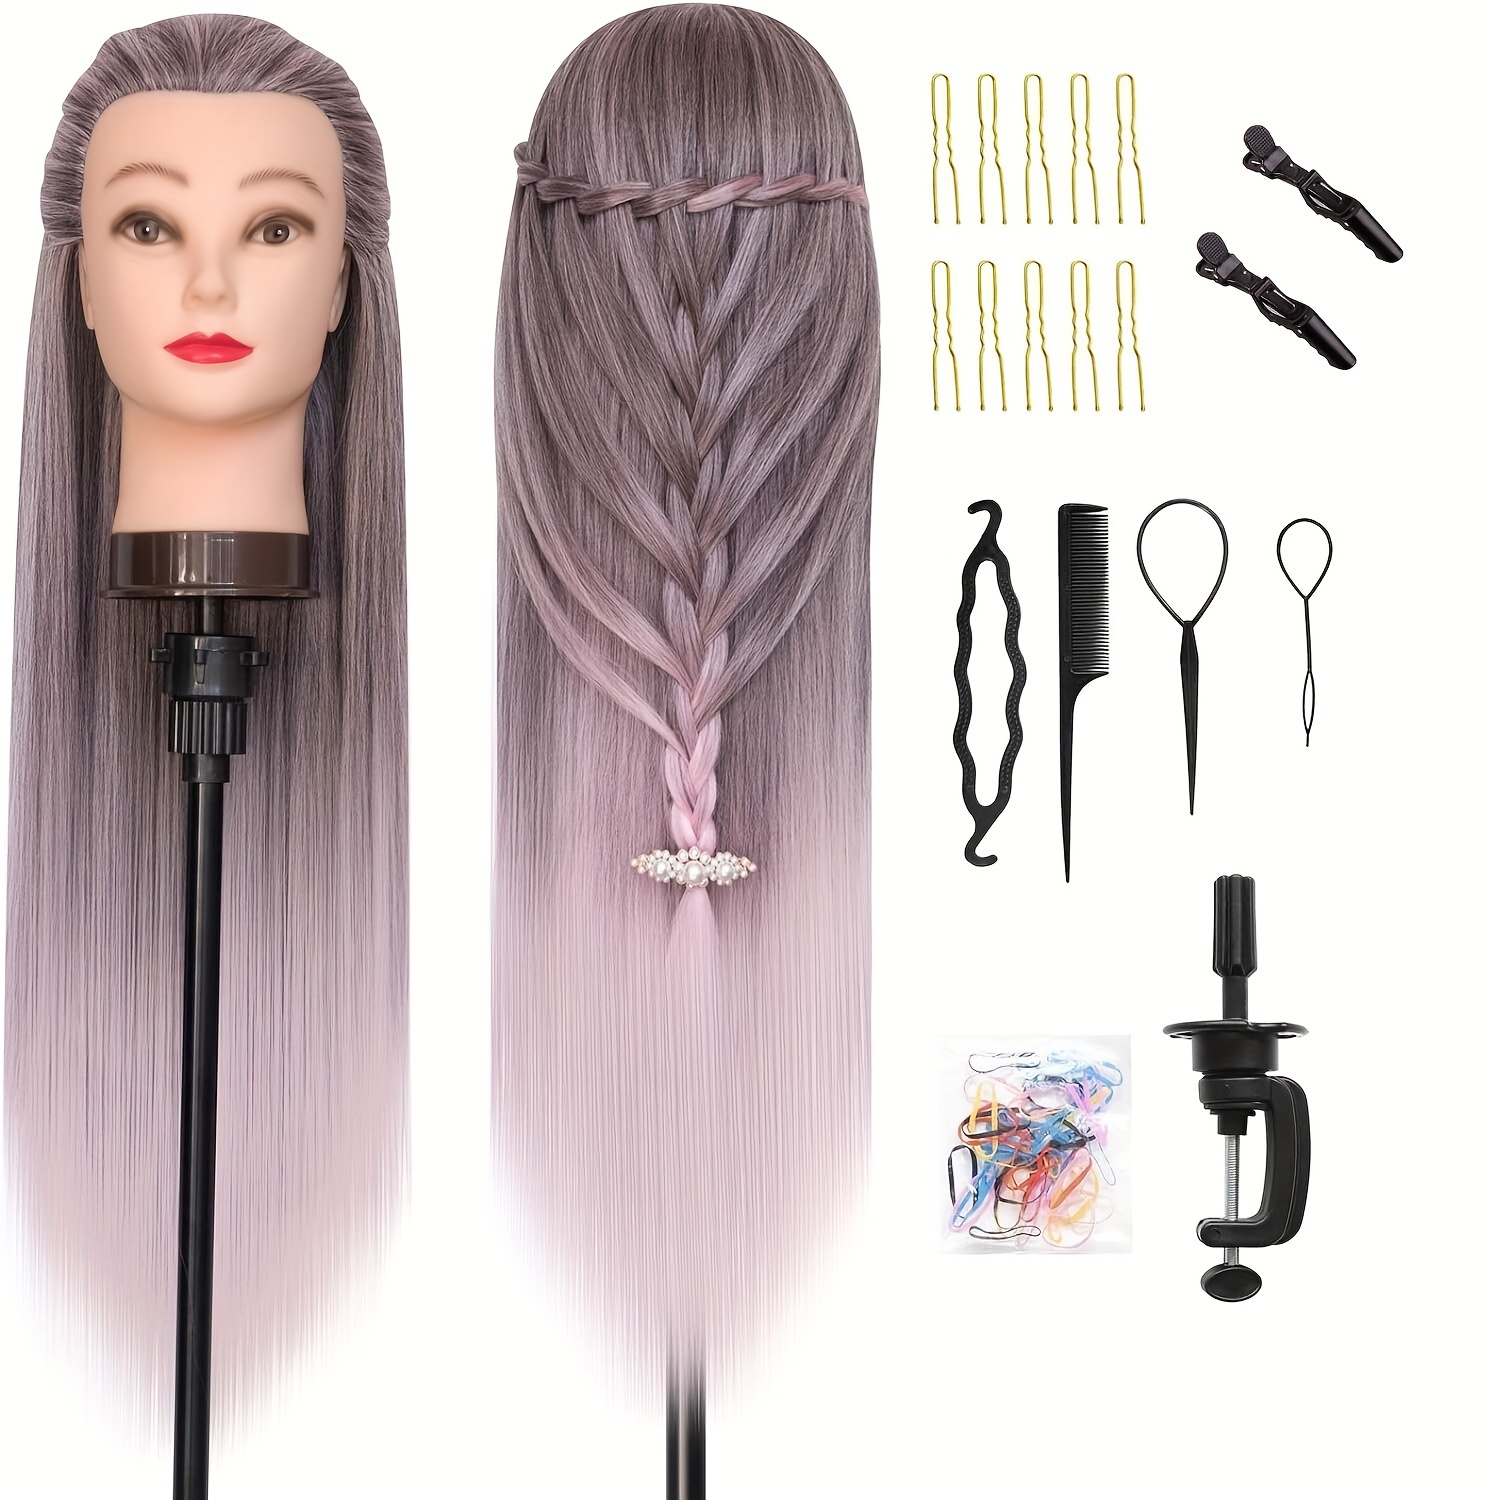 

Training Head, 26-28 Inch Synthetic Fiber Hair Silky Hairdressing Head Ombre Mannequin Dolls Head For Styling Practice With Table Clamp + Braid Set